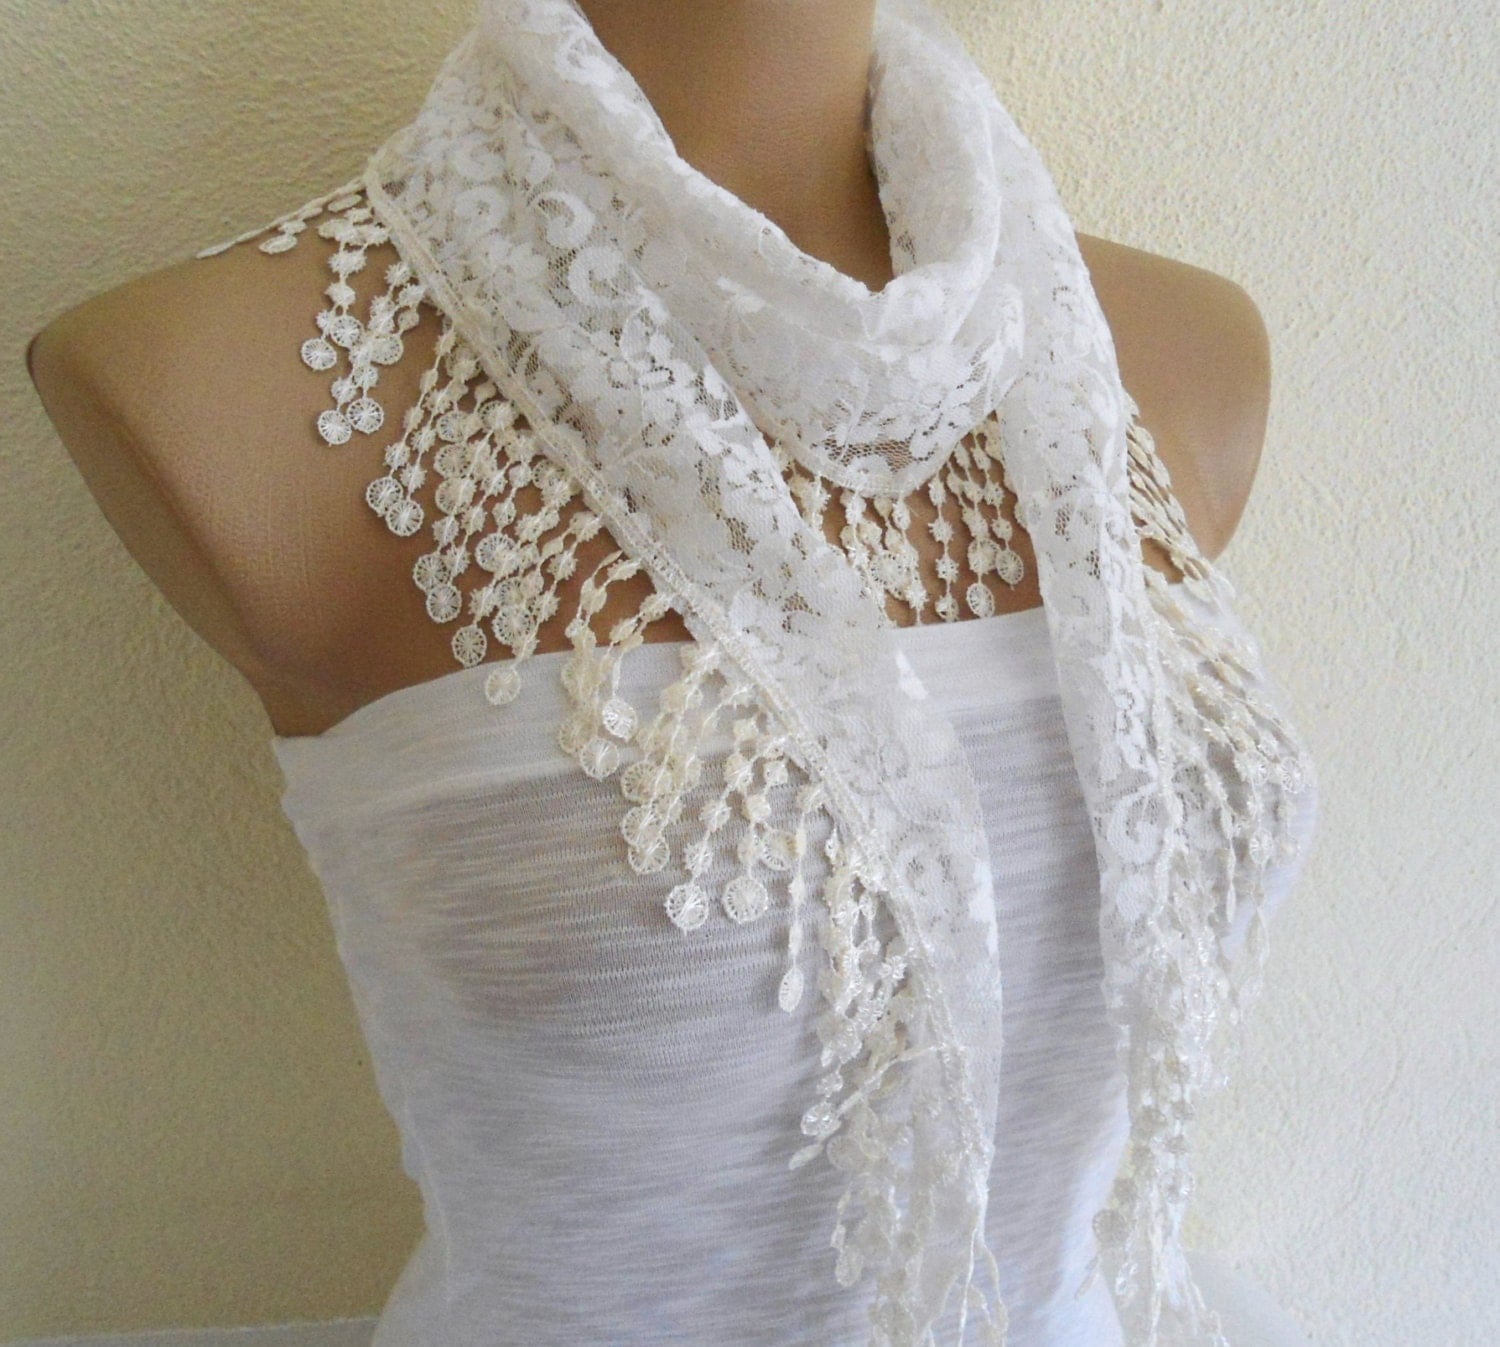 Necklace scarves Traditional Turkish-style Fashion by likeknitting